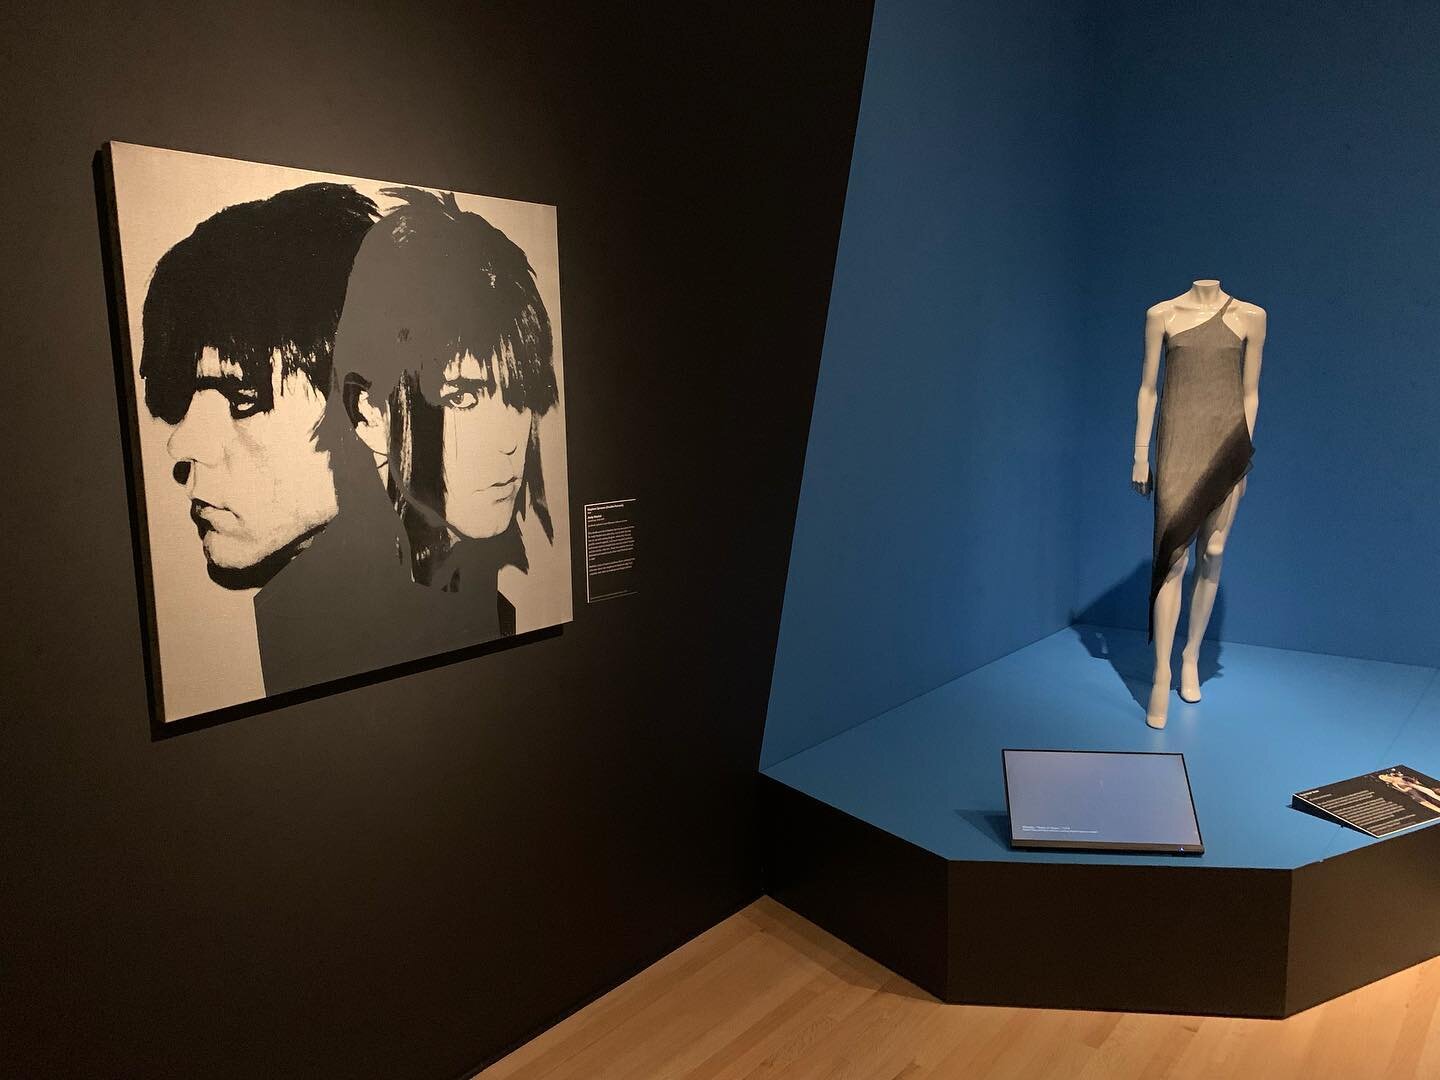 Stephen Sprouse: Rock | Art | Fashion at @newfieldstoday On view until April 2023.
#stephensprouse